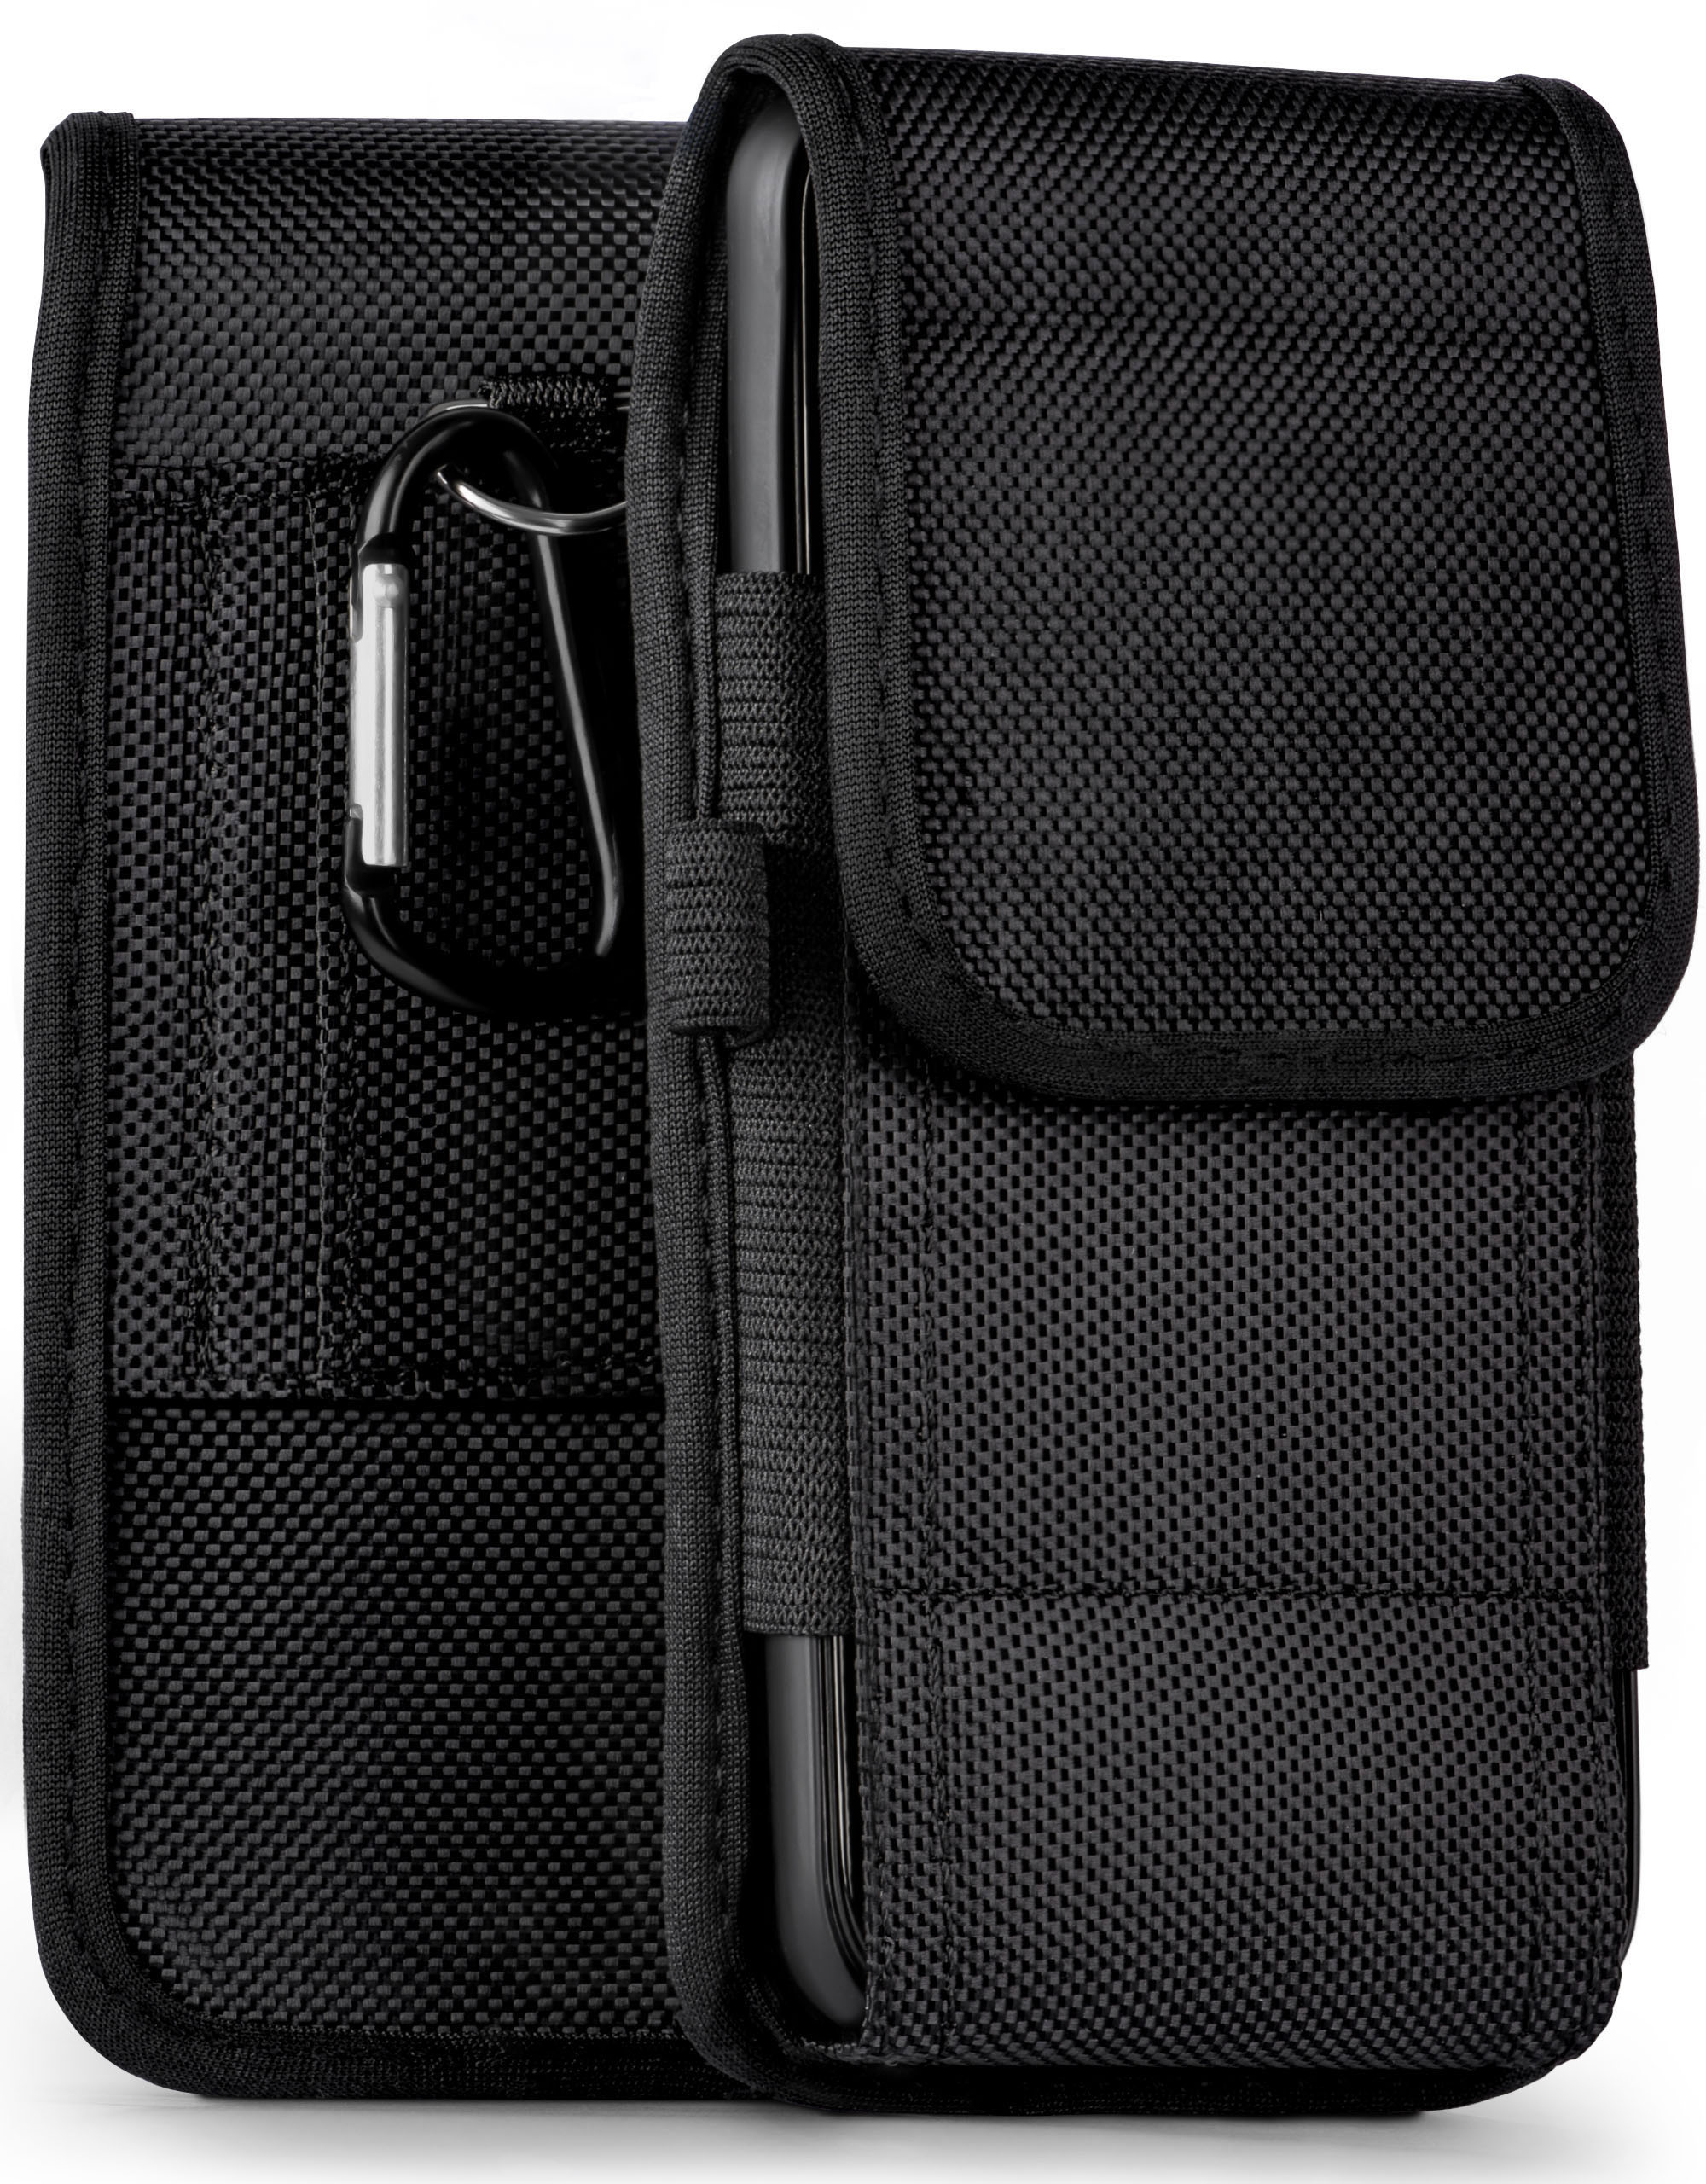 Compact, Trail Holster, Agility Case, Xperia Sony, MOEX X